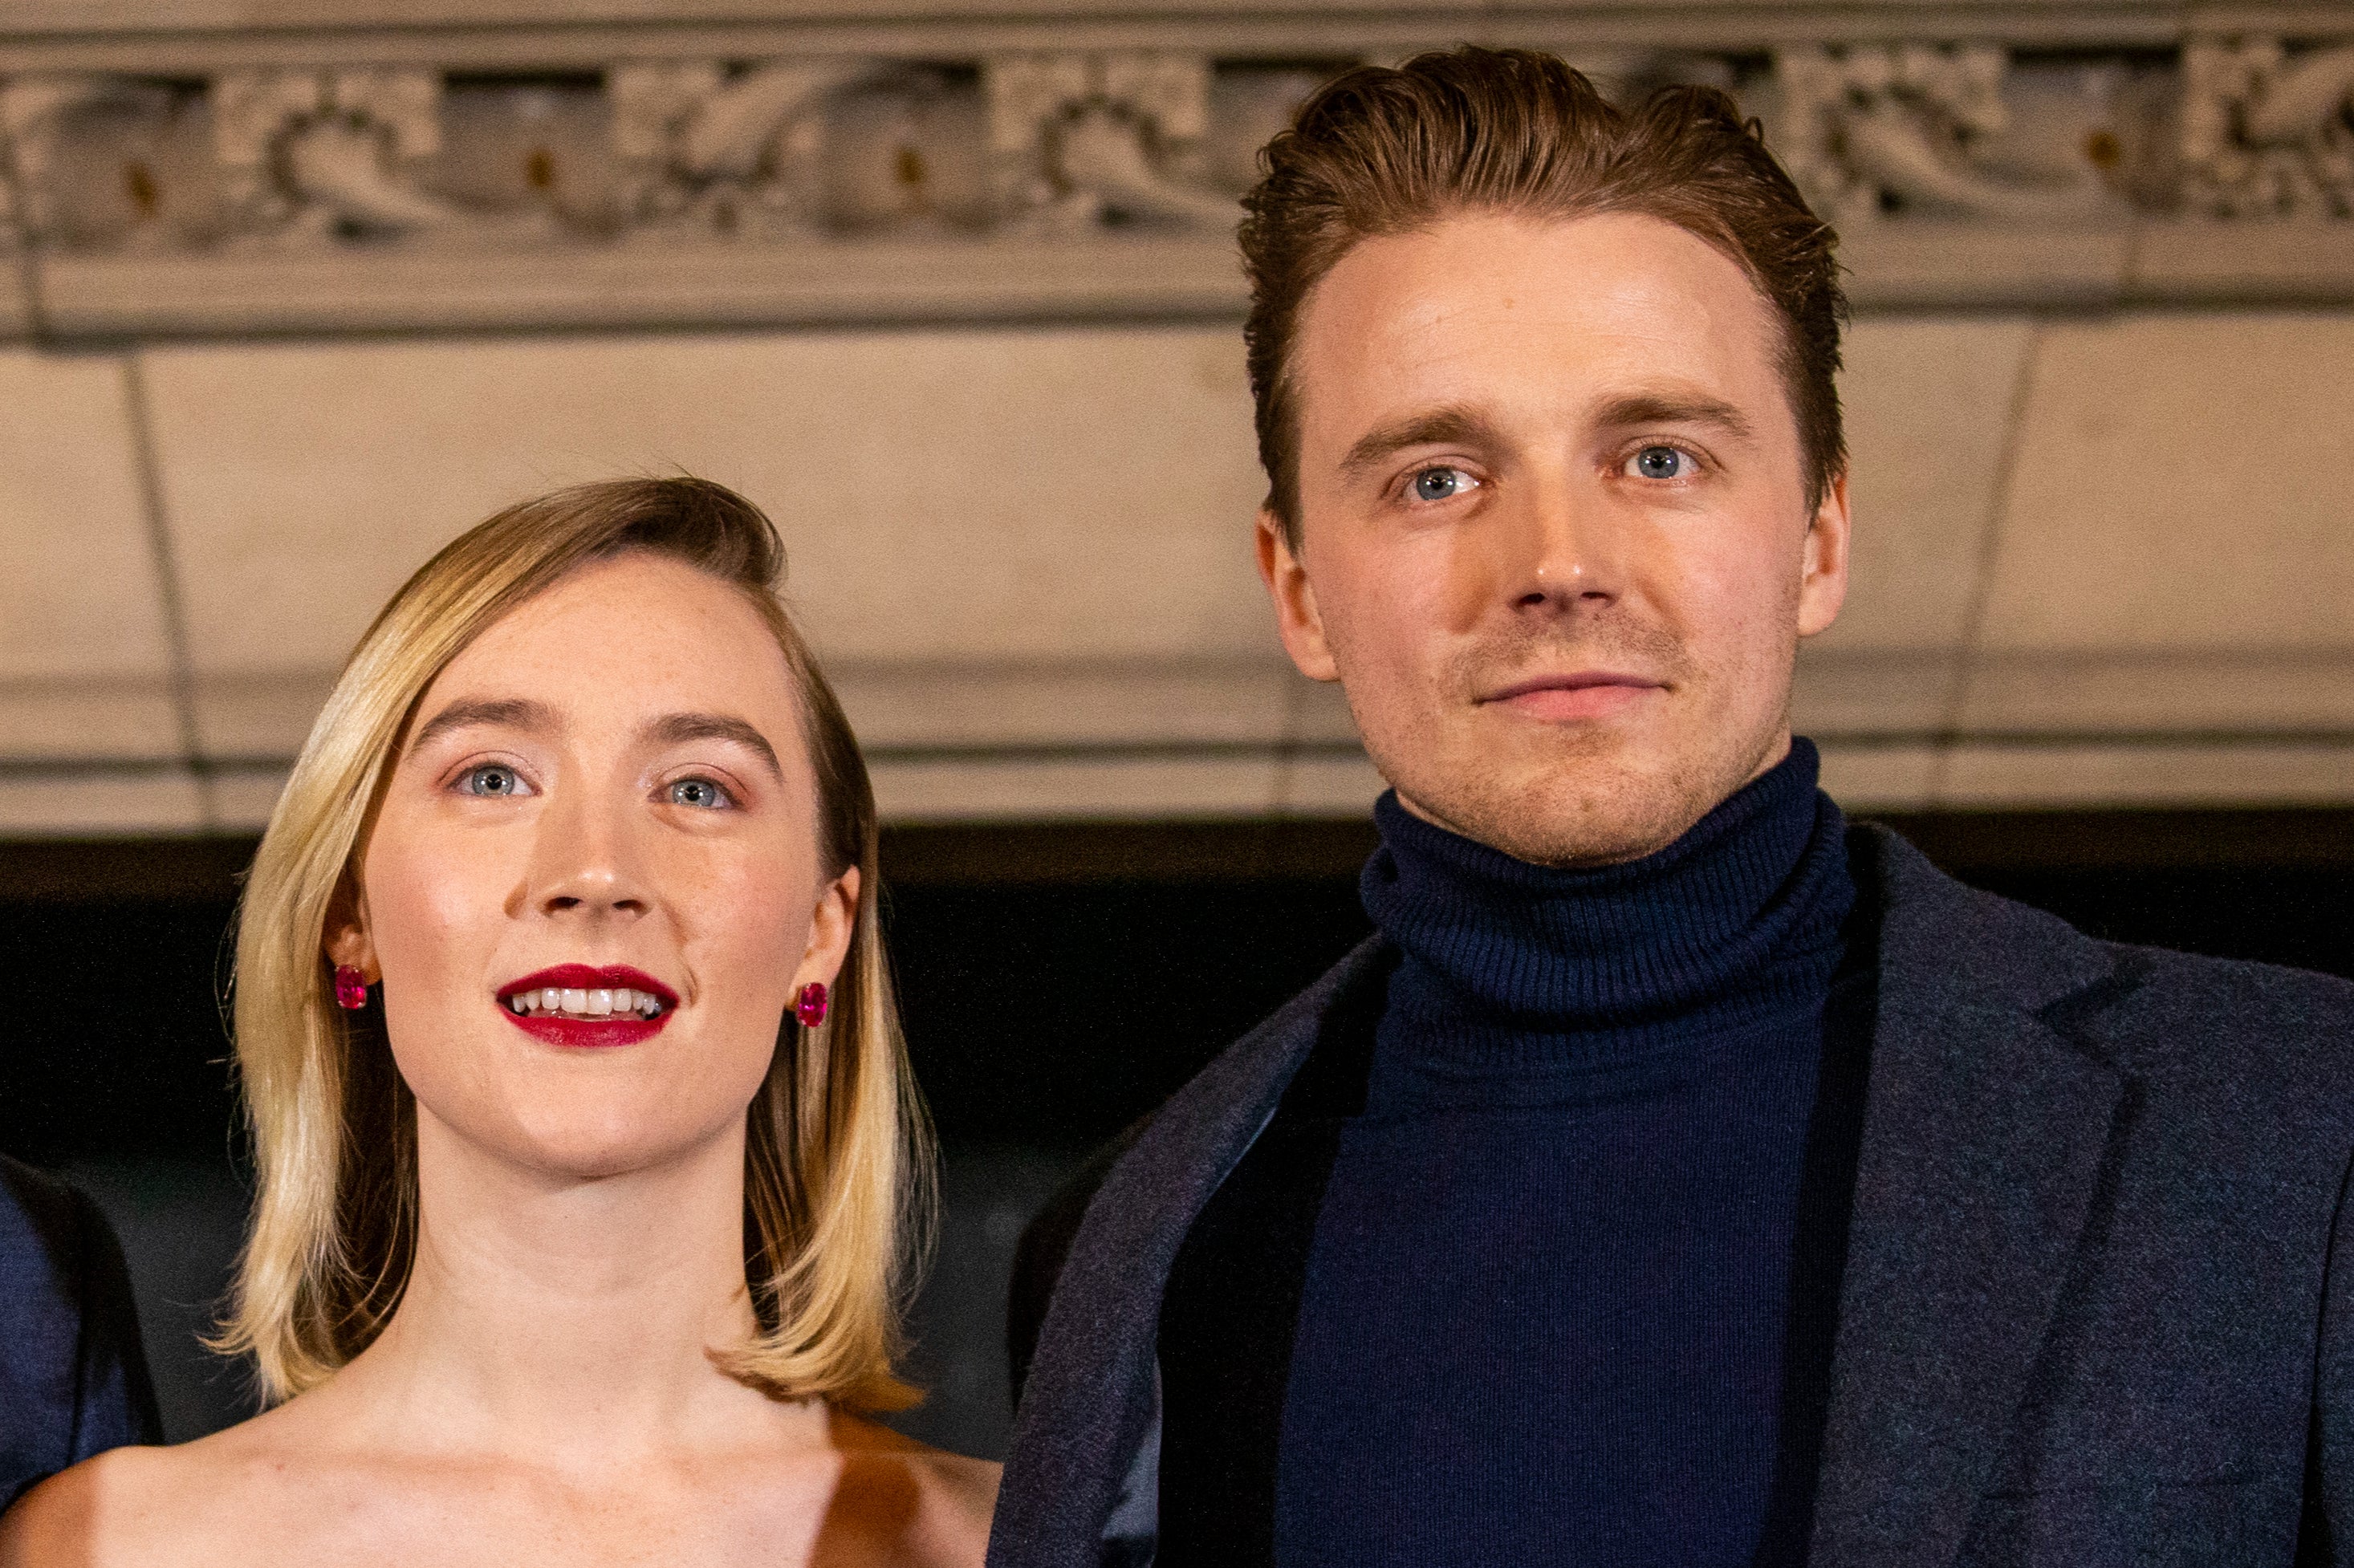 Ronan and Lowden at the Scottish premiere of ‘Mary Queen of Scots’ in 2019 – the film they met working on together